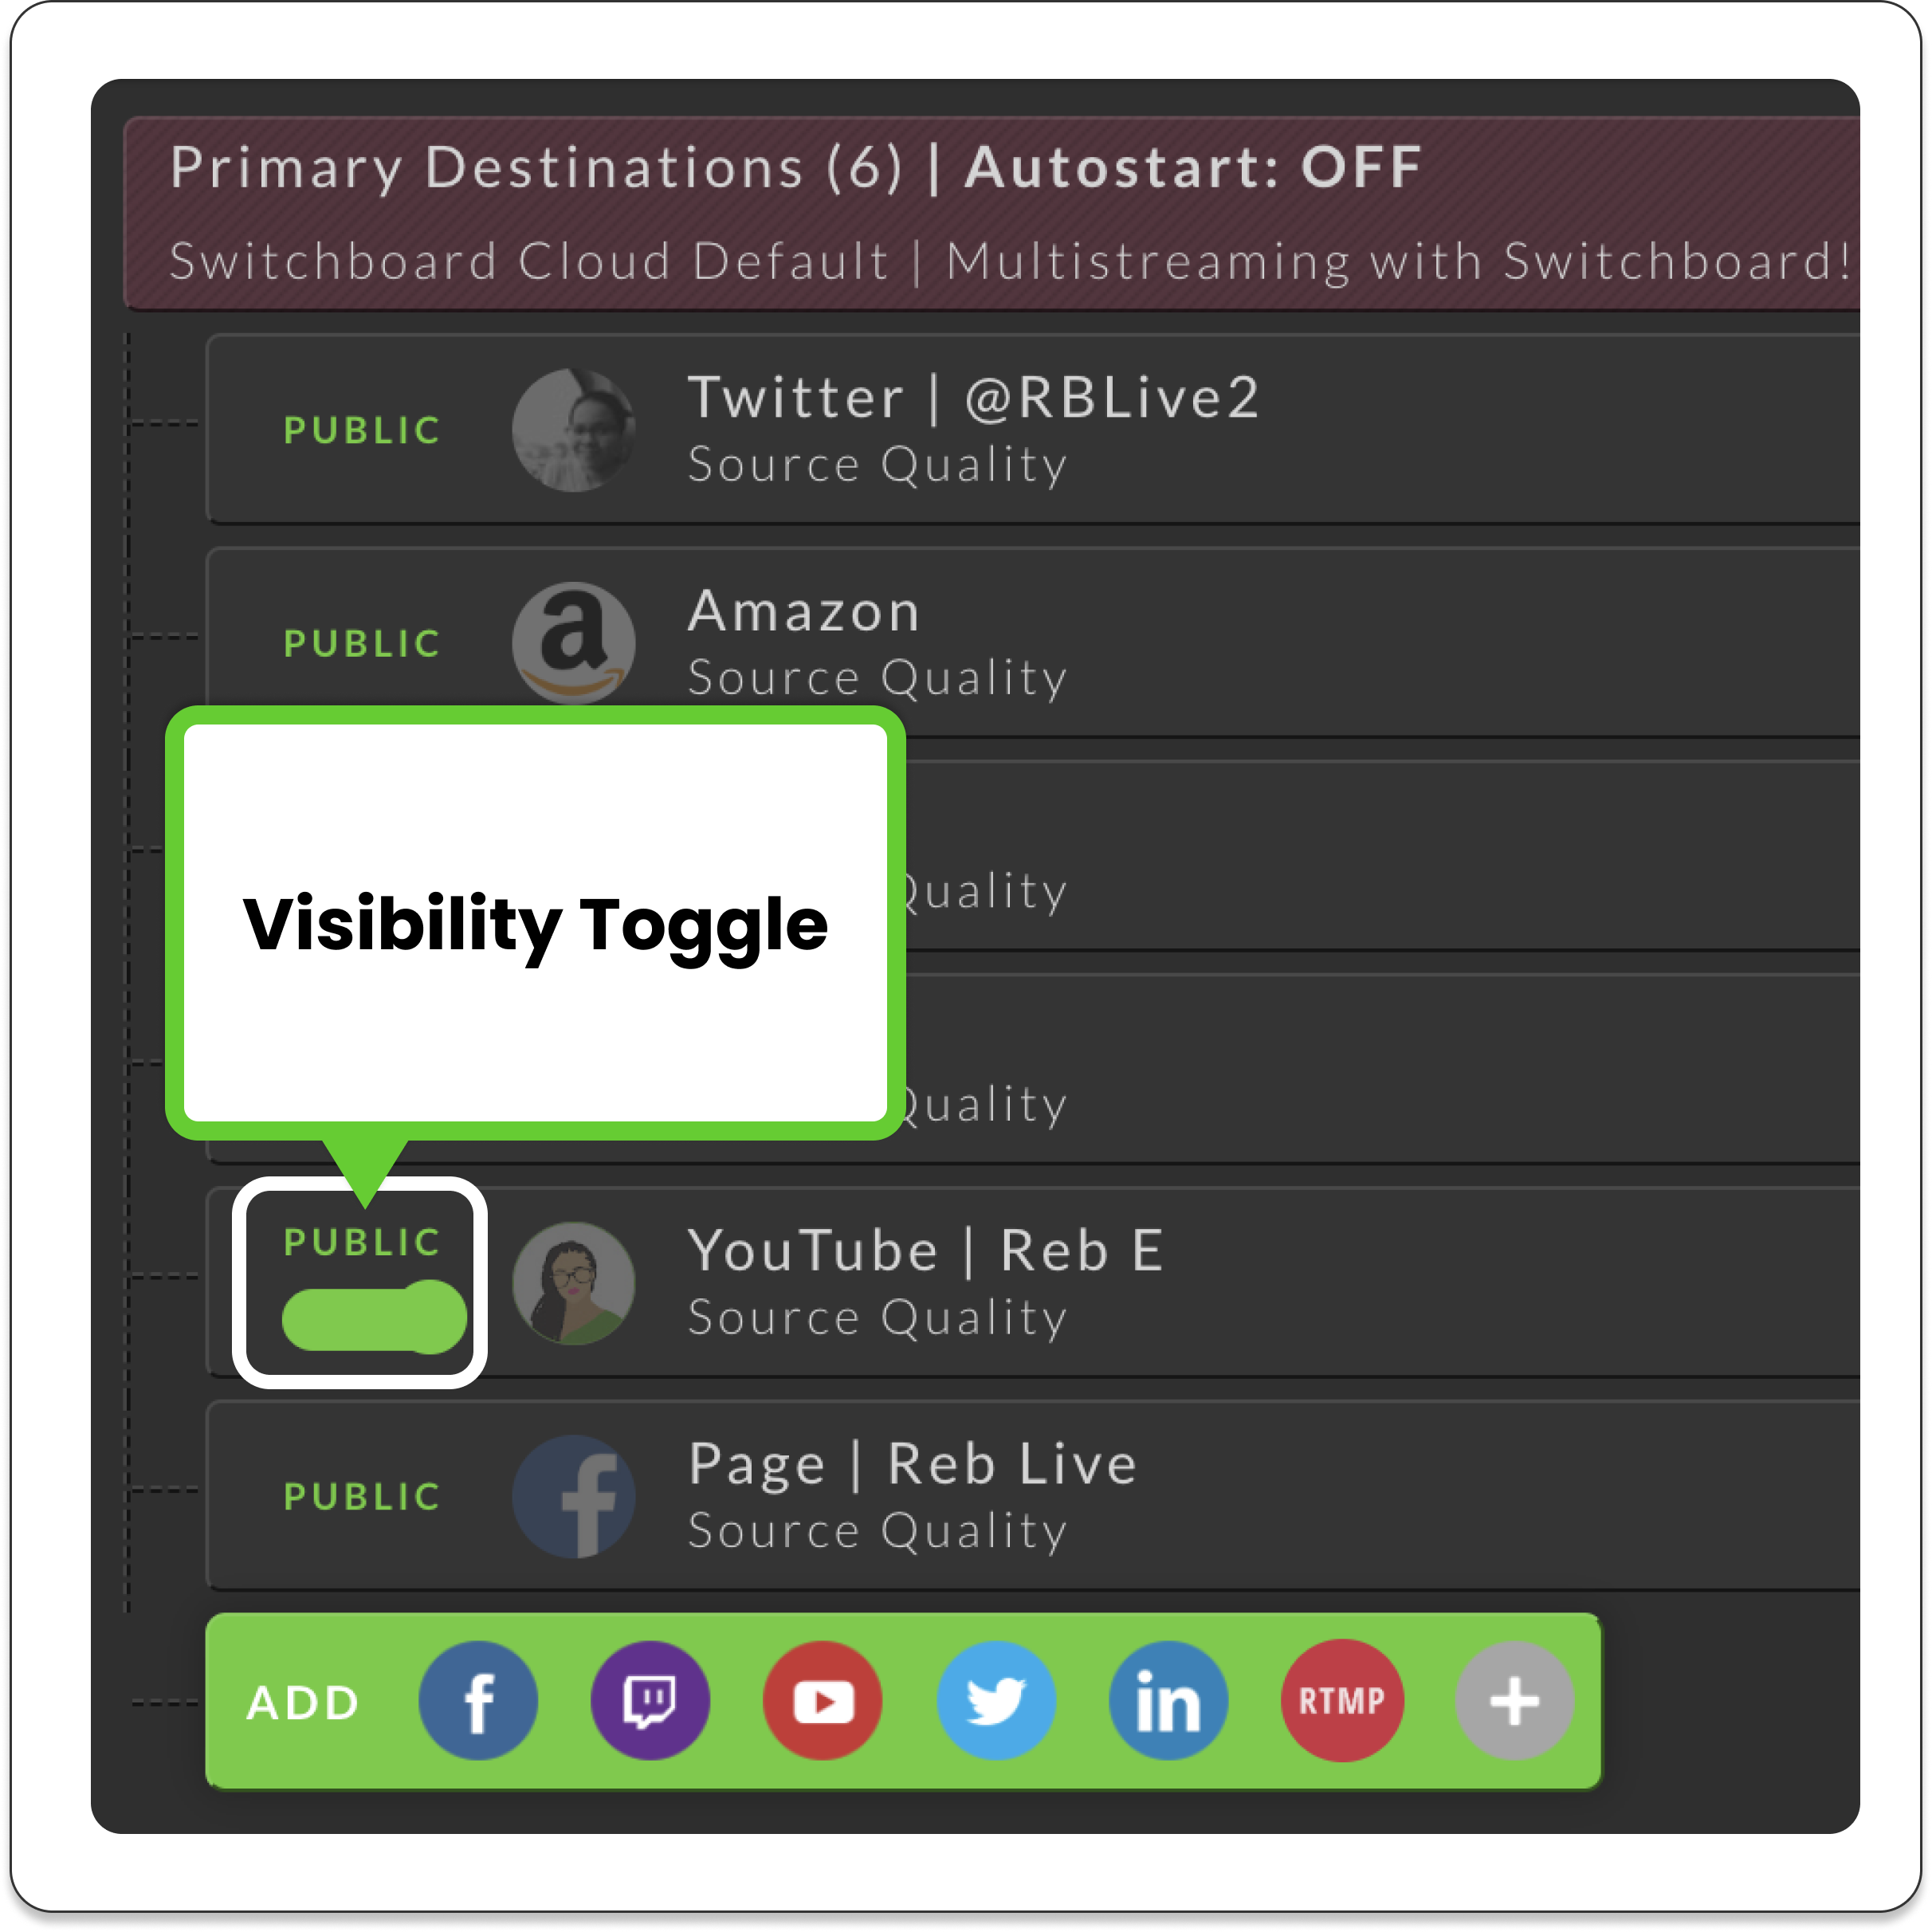 switchboardlive_workflow-page_destinations_pane_visibility_toggle_public.png